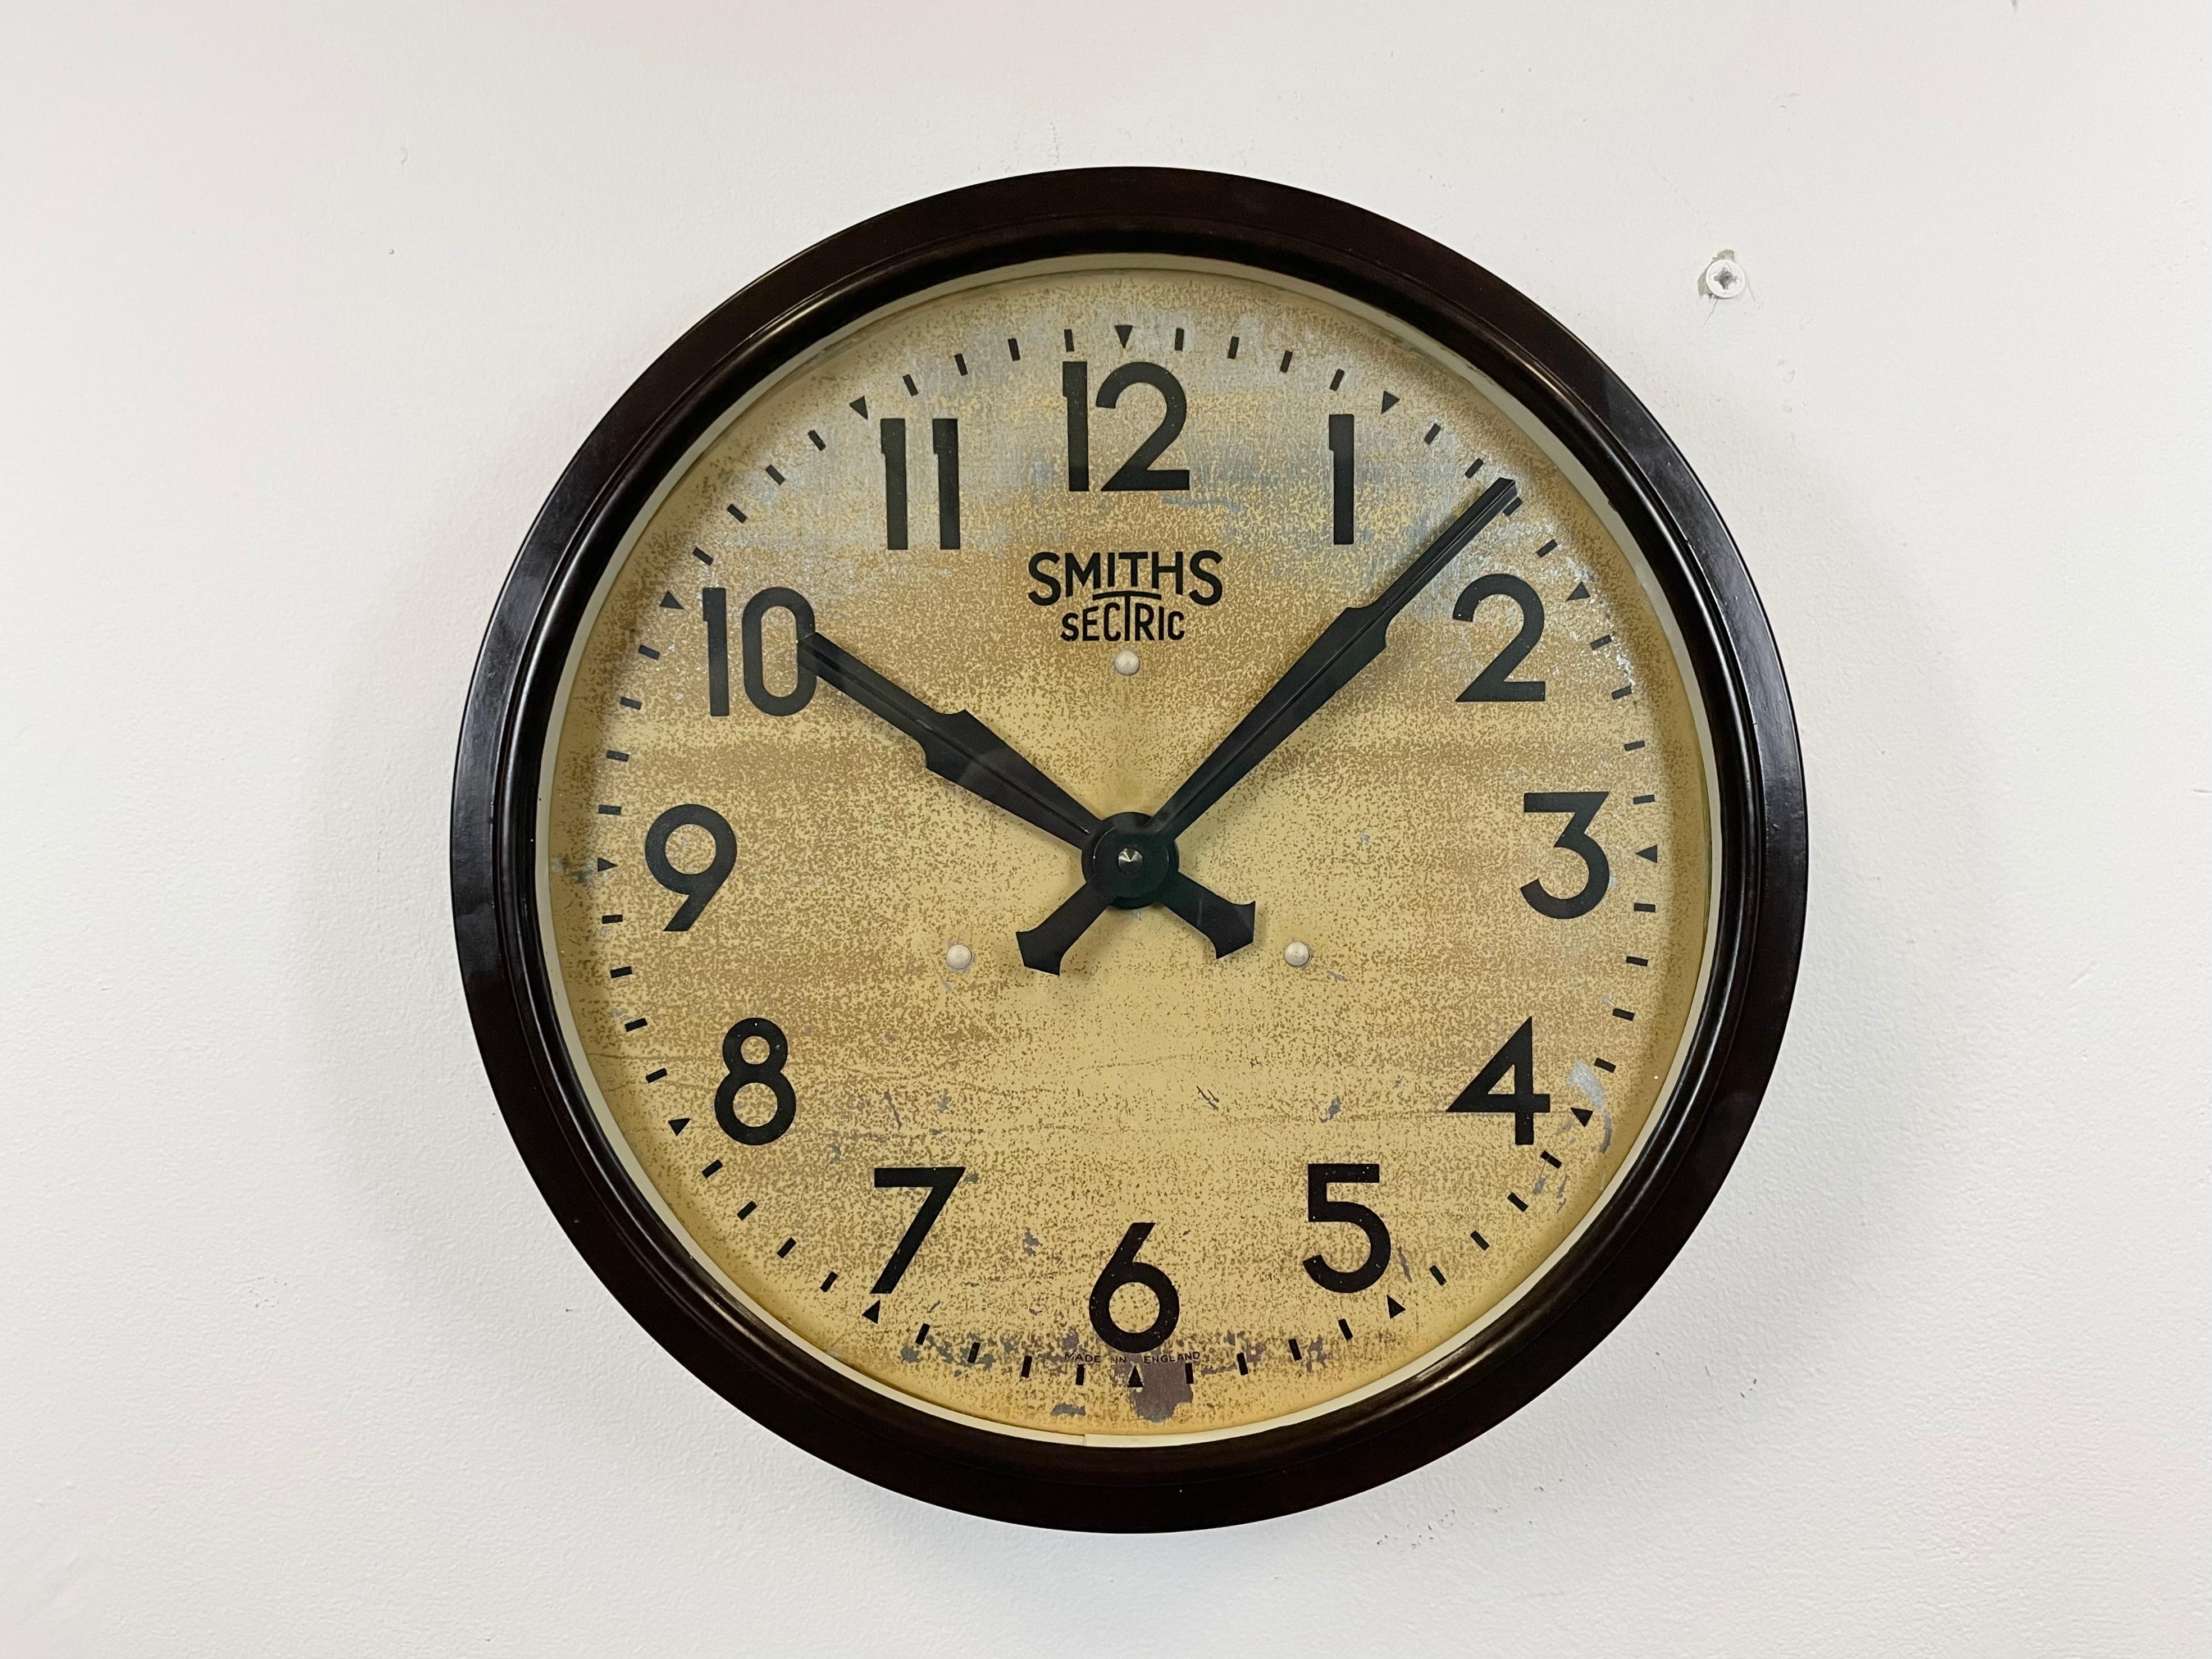 This wall clock was produced by Smith Sectric in England during the 1930s. It features a brown bakelite frame, an iron dial, an aluminium hands and a clear glass cover. The piece has been converted into a battery-powered clockwork and requires only